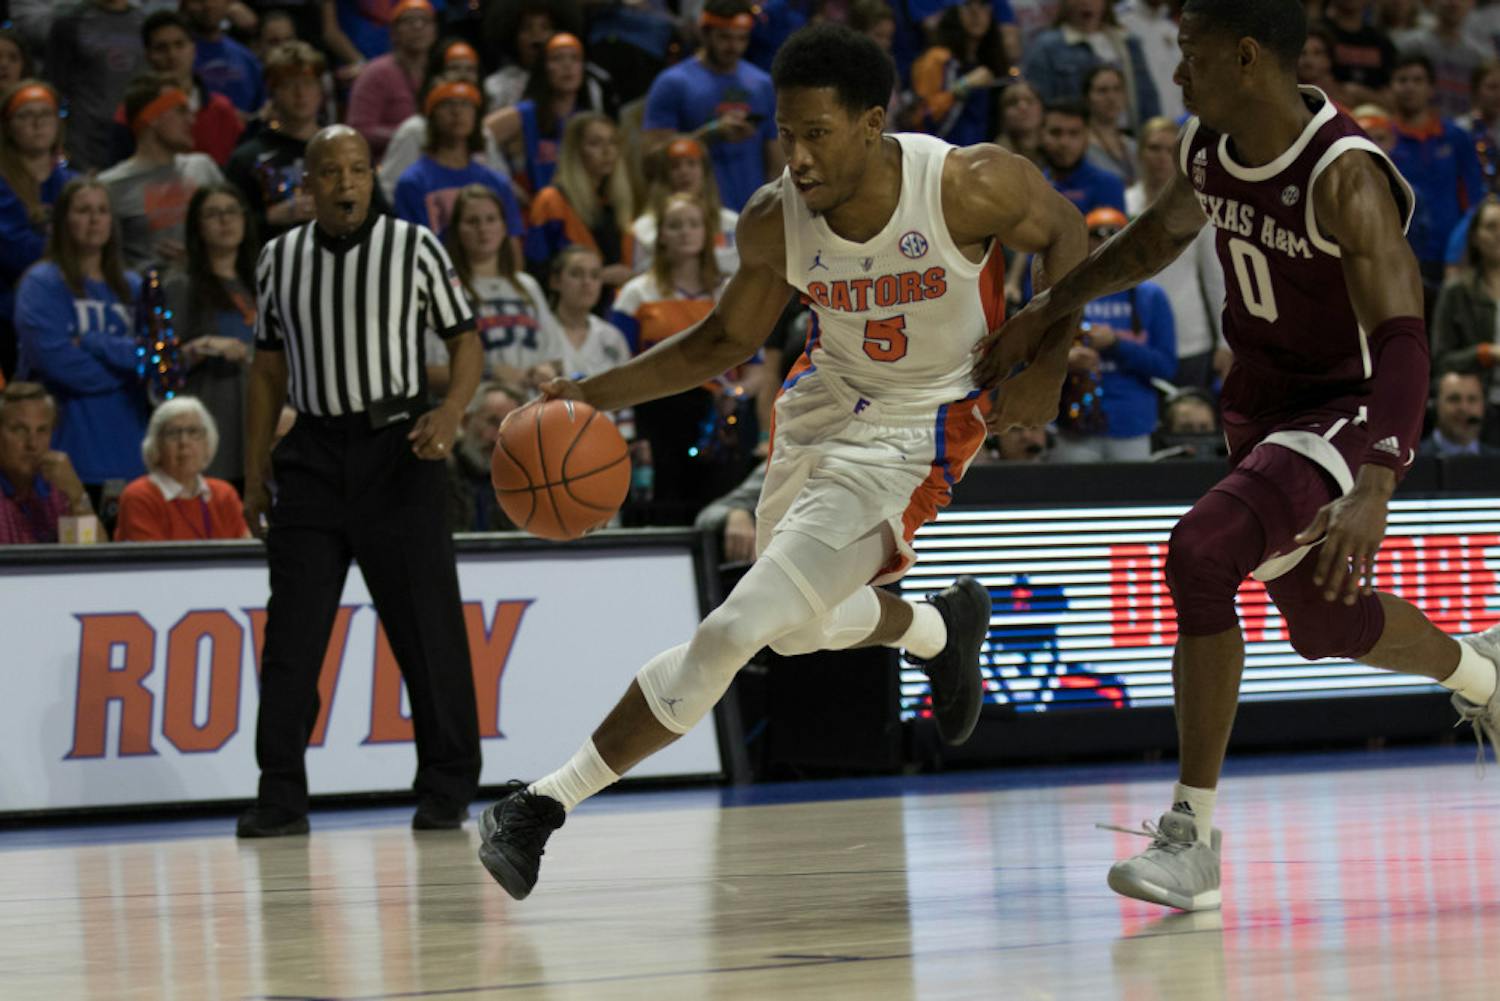 Guard KeVaughn Allen became the first Gator this season to score at least 20 points when he dropped 31 against Texas A&amp;M on Tuesday. "It's two games in a row where he's just been aggressive, confident," coach Mike White said. 